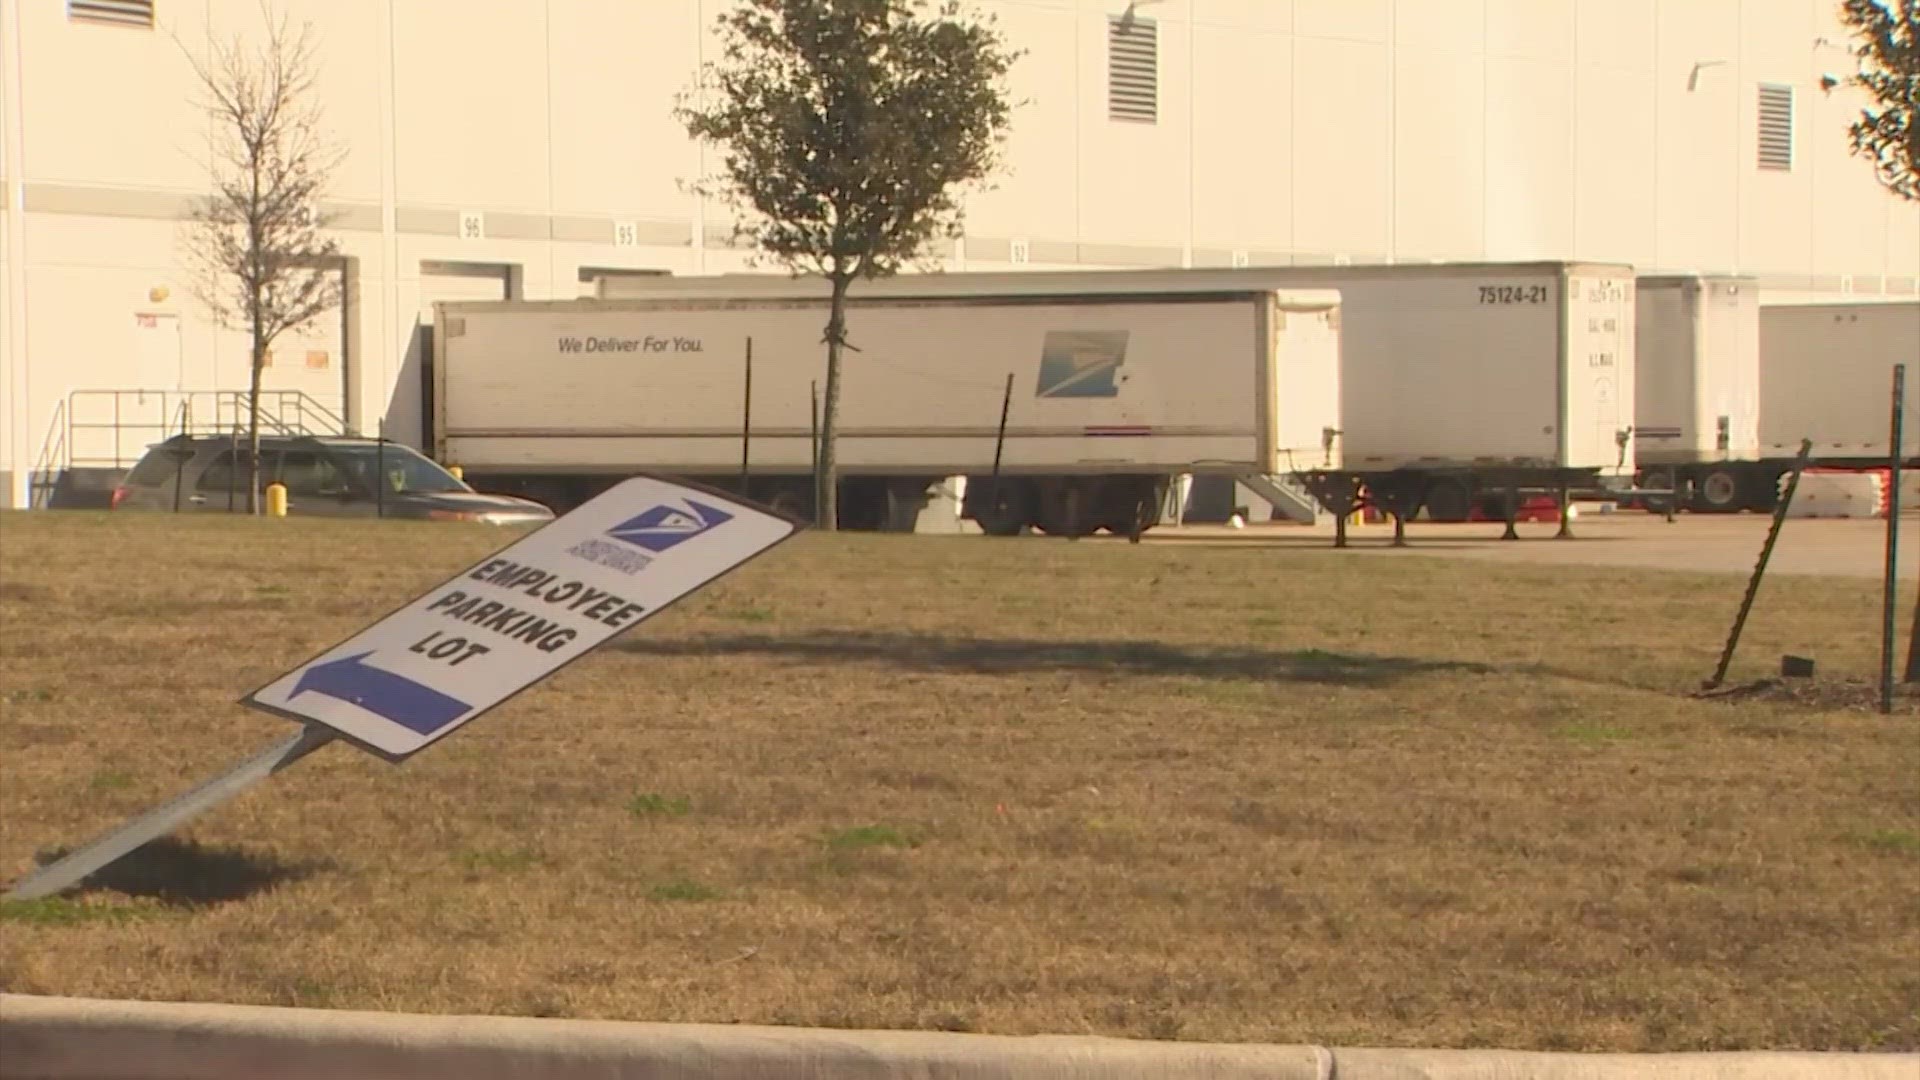 We've been reporting on packages being stuck at the Missouri City processing center for weeks.